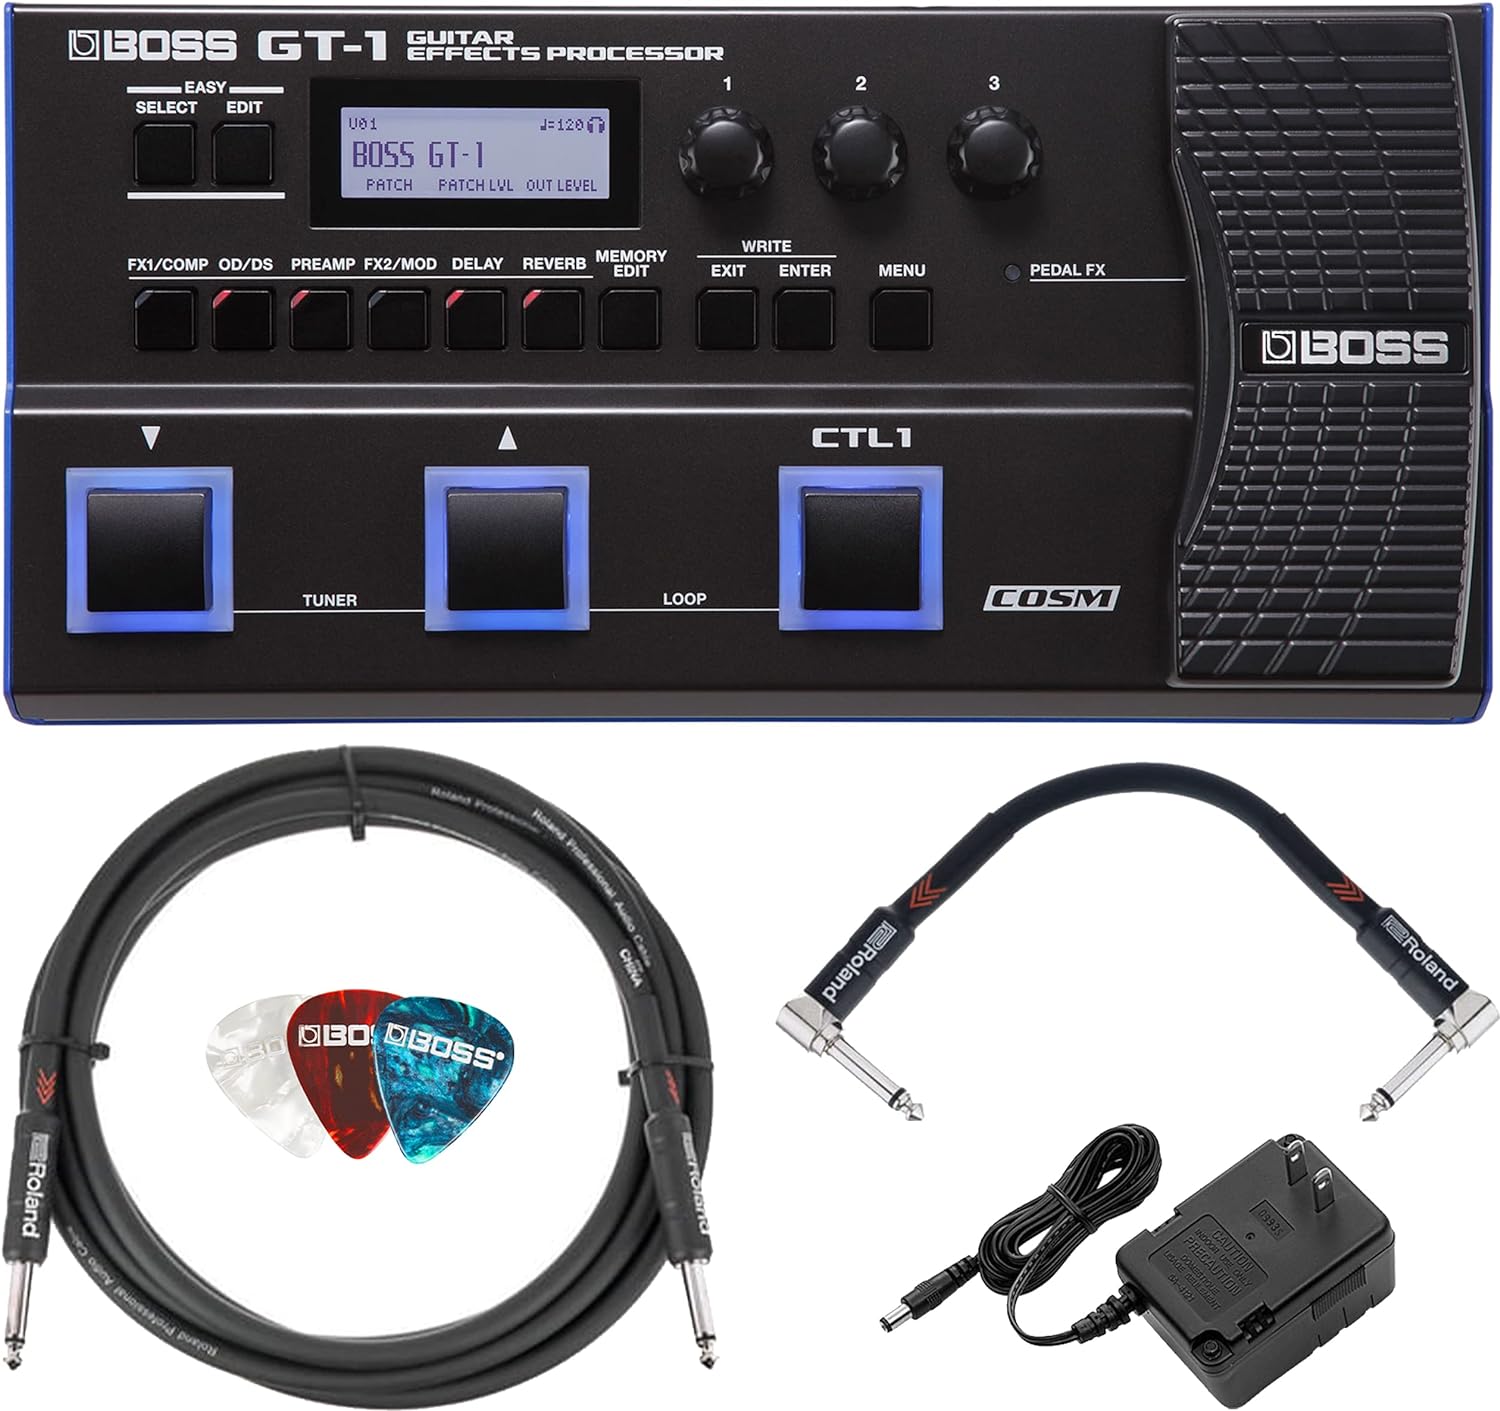 Buy BOSS GT-1 Guitar Effects Processor Bundle with AC Adapter, Roland  Instrument Cable, Patch Cable, and Picks Online in Pakistan. B09N7T3ZXV